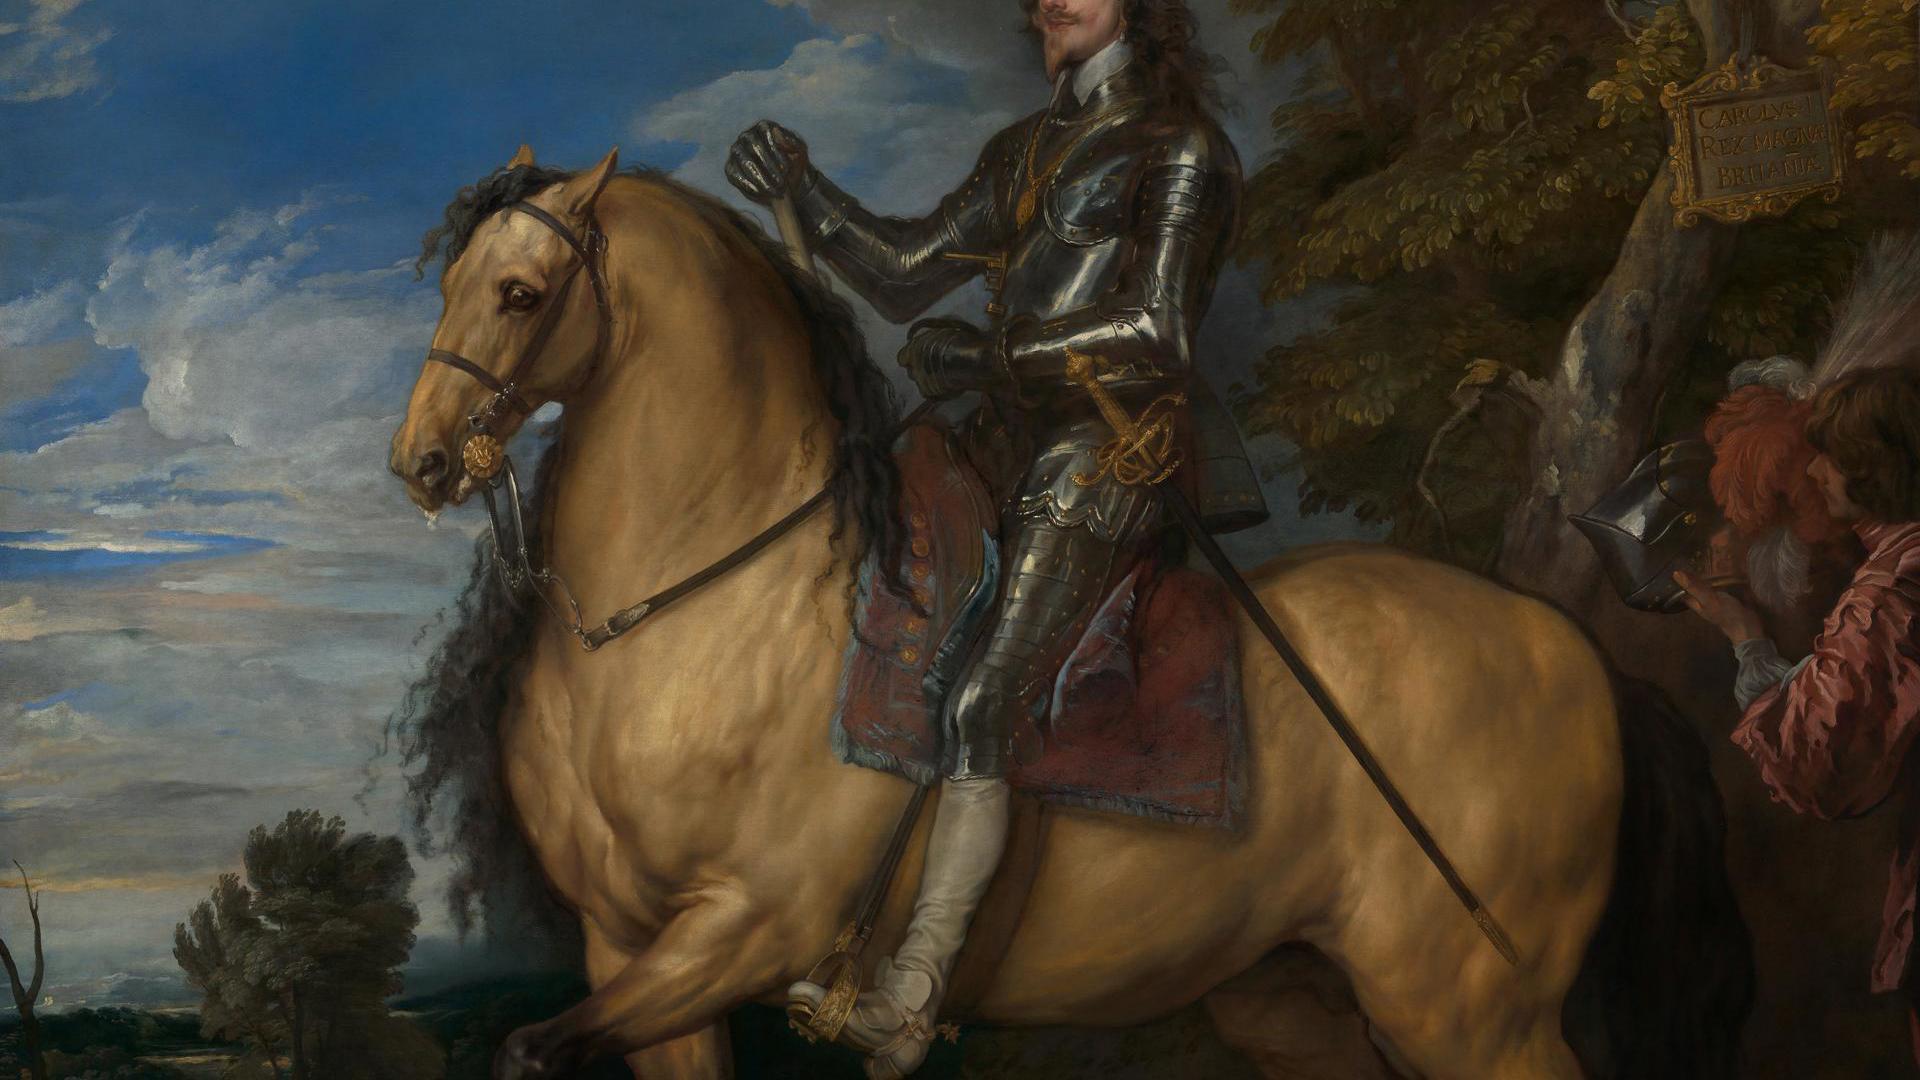 Equestrian Portrait of Charles I by Anthony van Dyck